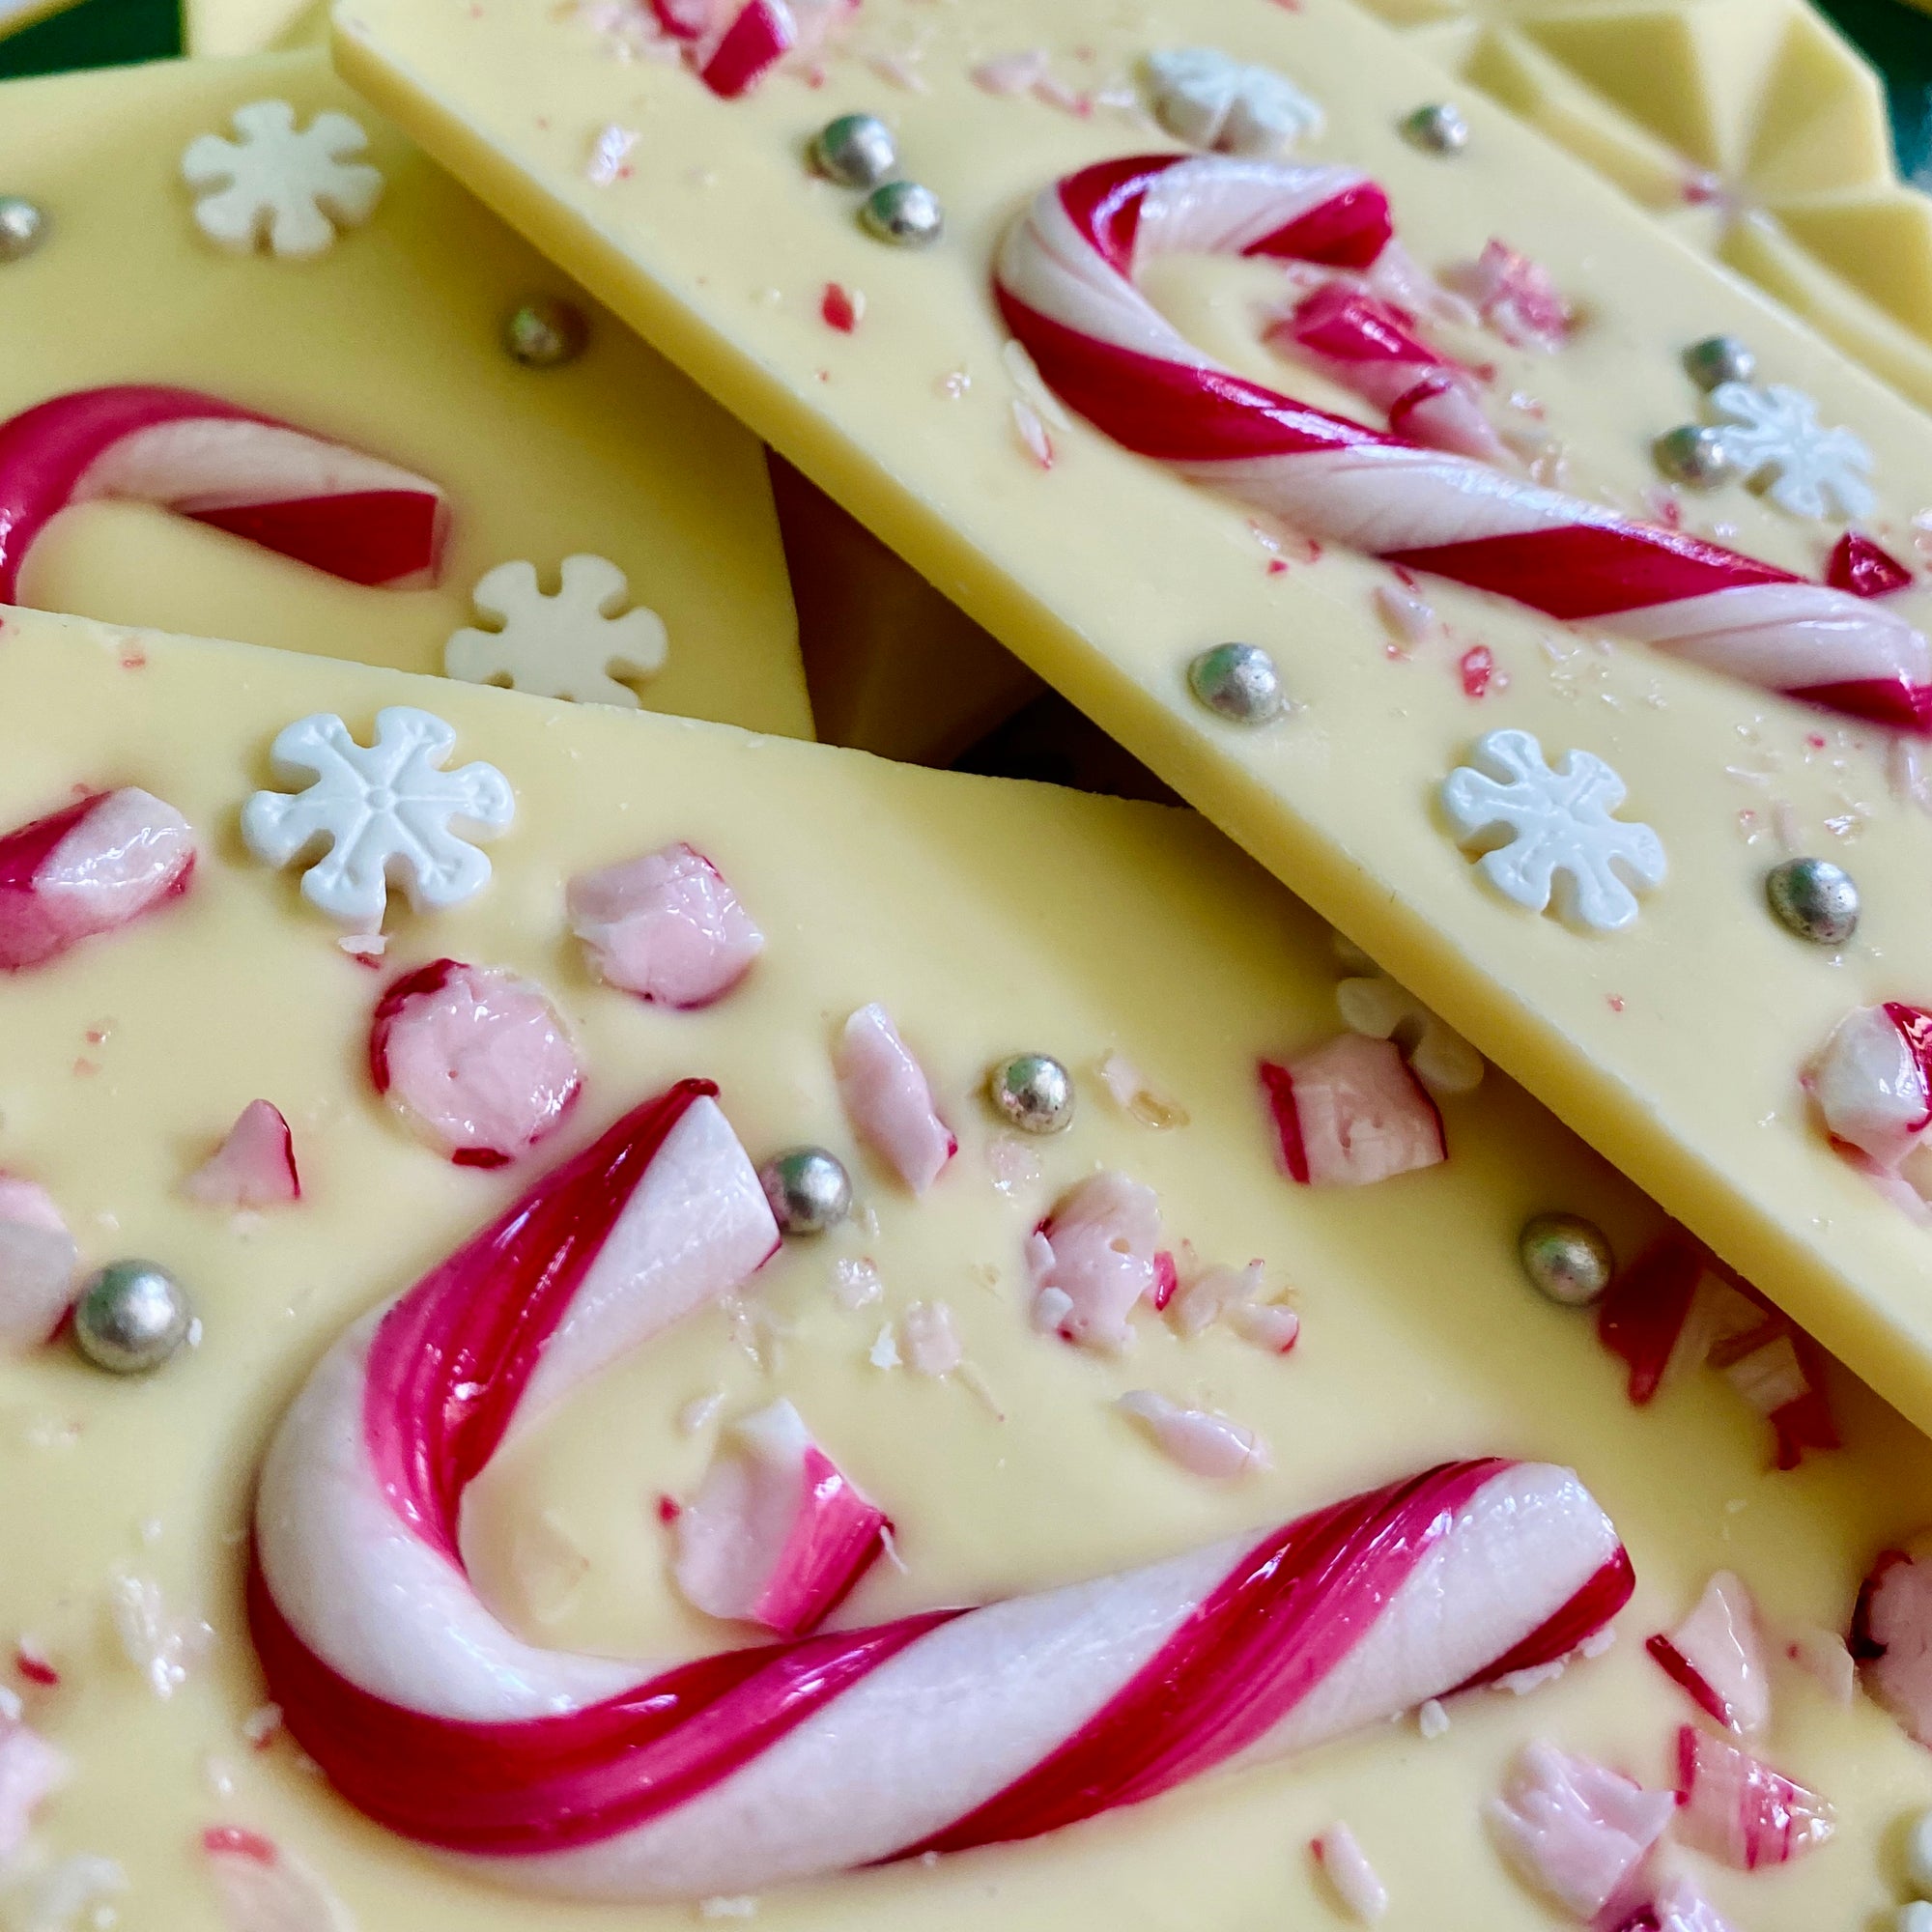 Snowy Peppermint Bliss - A single 110g white Belgian chocolate bar adorned with candy canes, silver sugar balls, and snowflakes